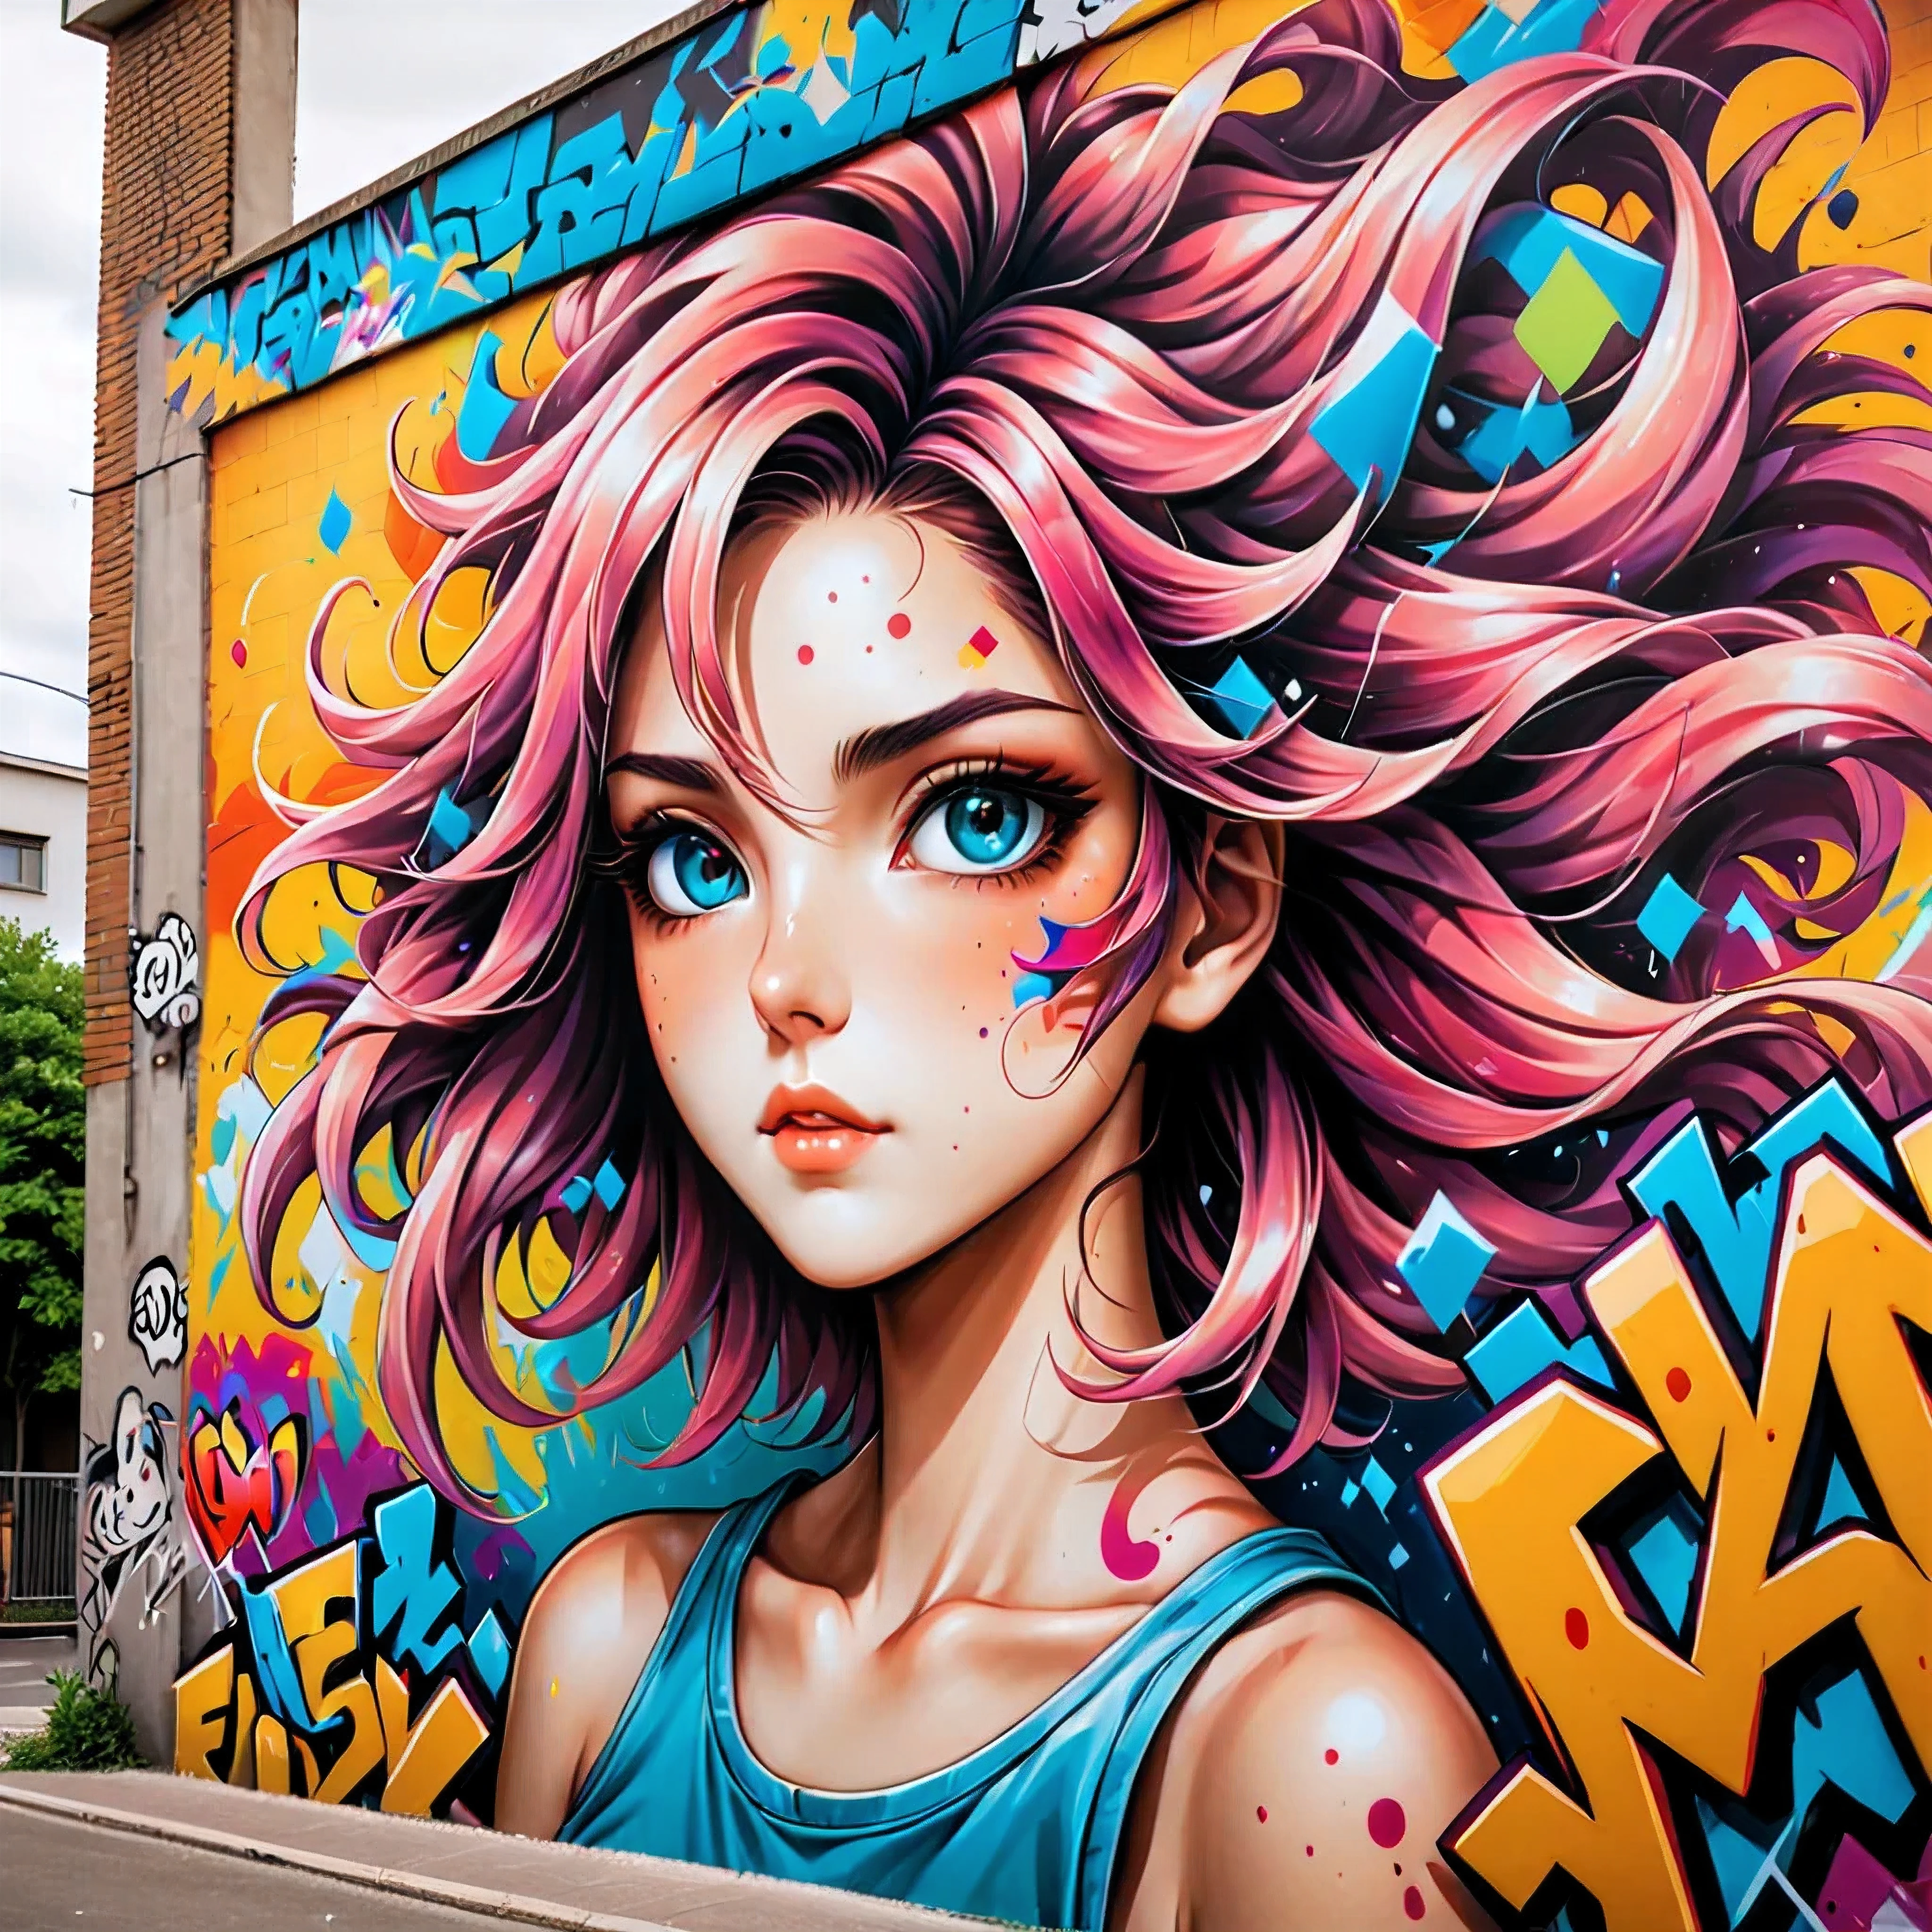 A mural of graffiti comic in a building wall.

(best quality,realistic),(close-up),(anime artwork:1.1),(mural),(venus 5 style:1.1),(90s anime style:1.1),(vibrant colors),(detailed characteragical atmosphere),(soft lighting),(nostalgic),(dynamic poses),(expressive eyes:1.1),(beautiful hairstyles),(playful expressions),(whimsical background),(eye-catching),(colorful composition)